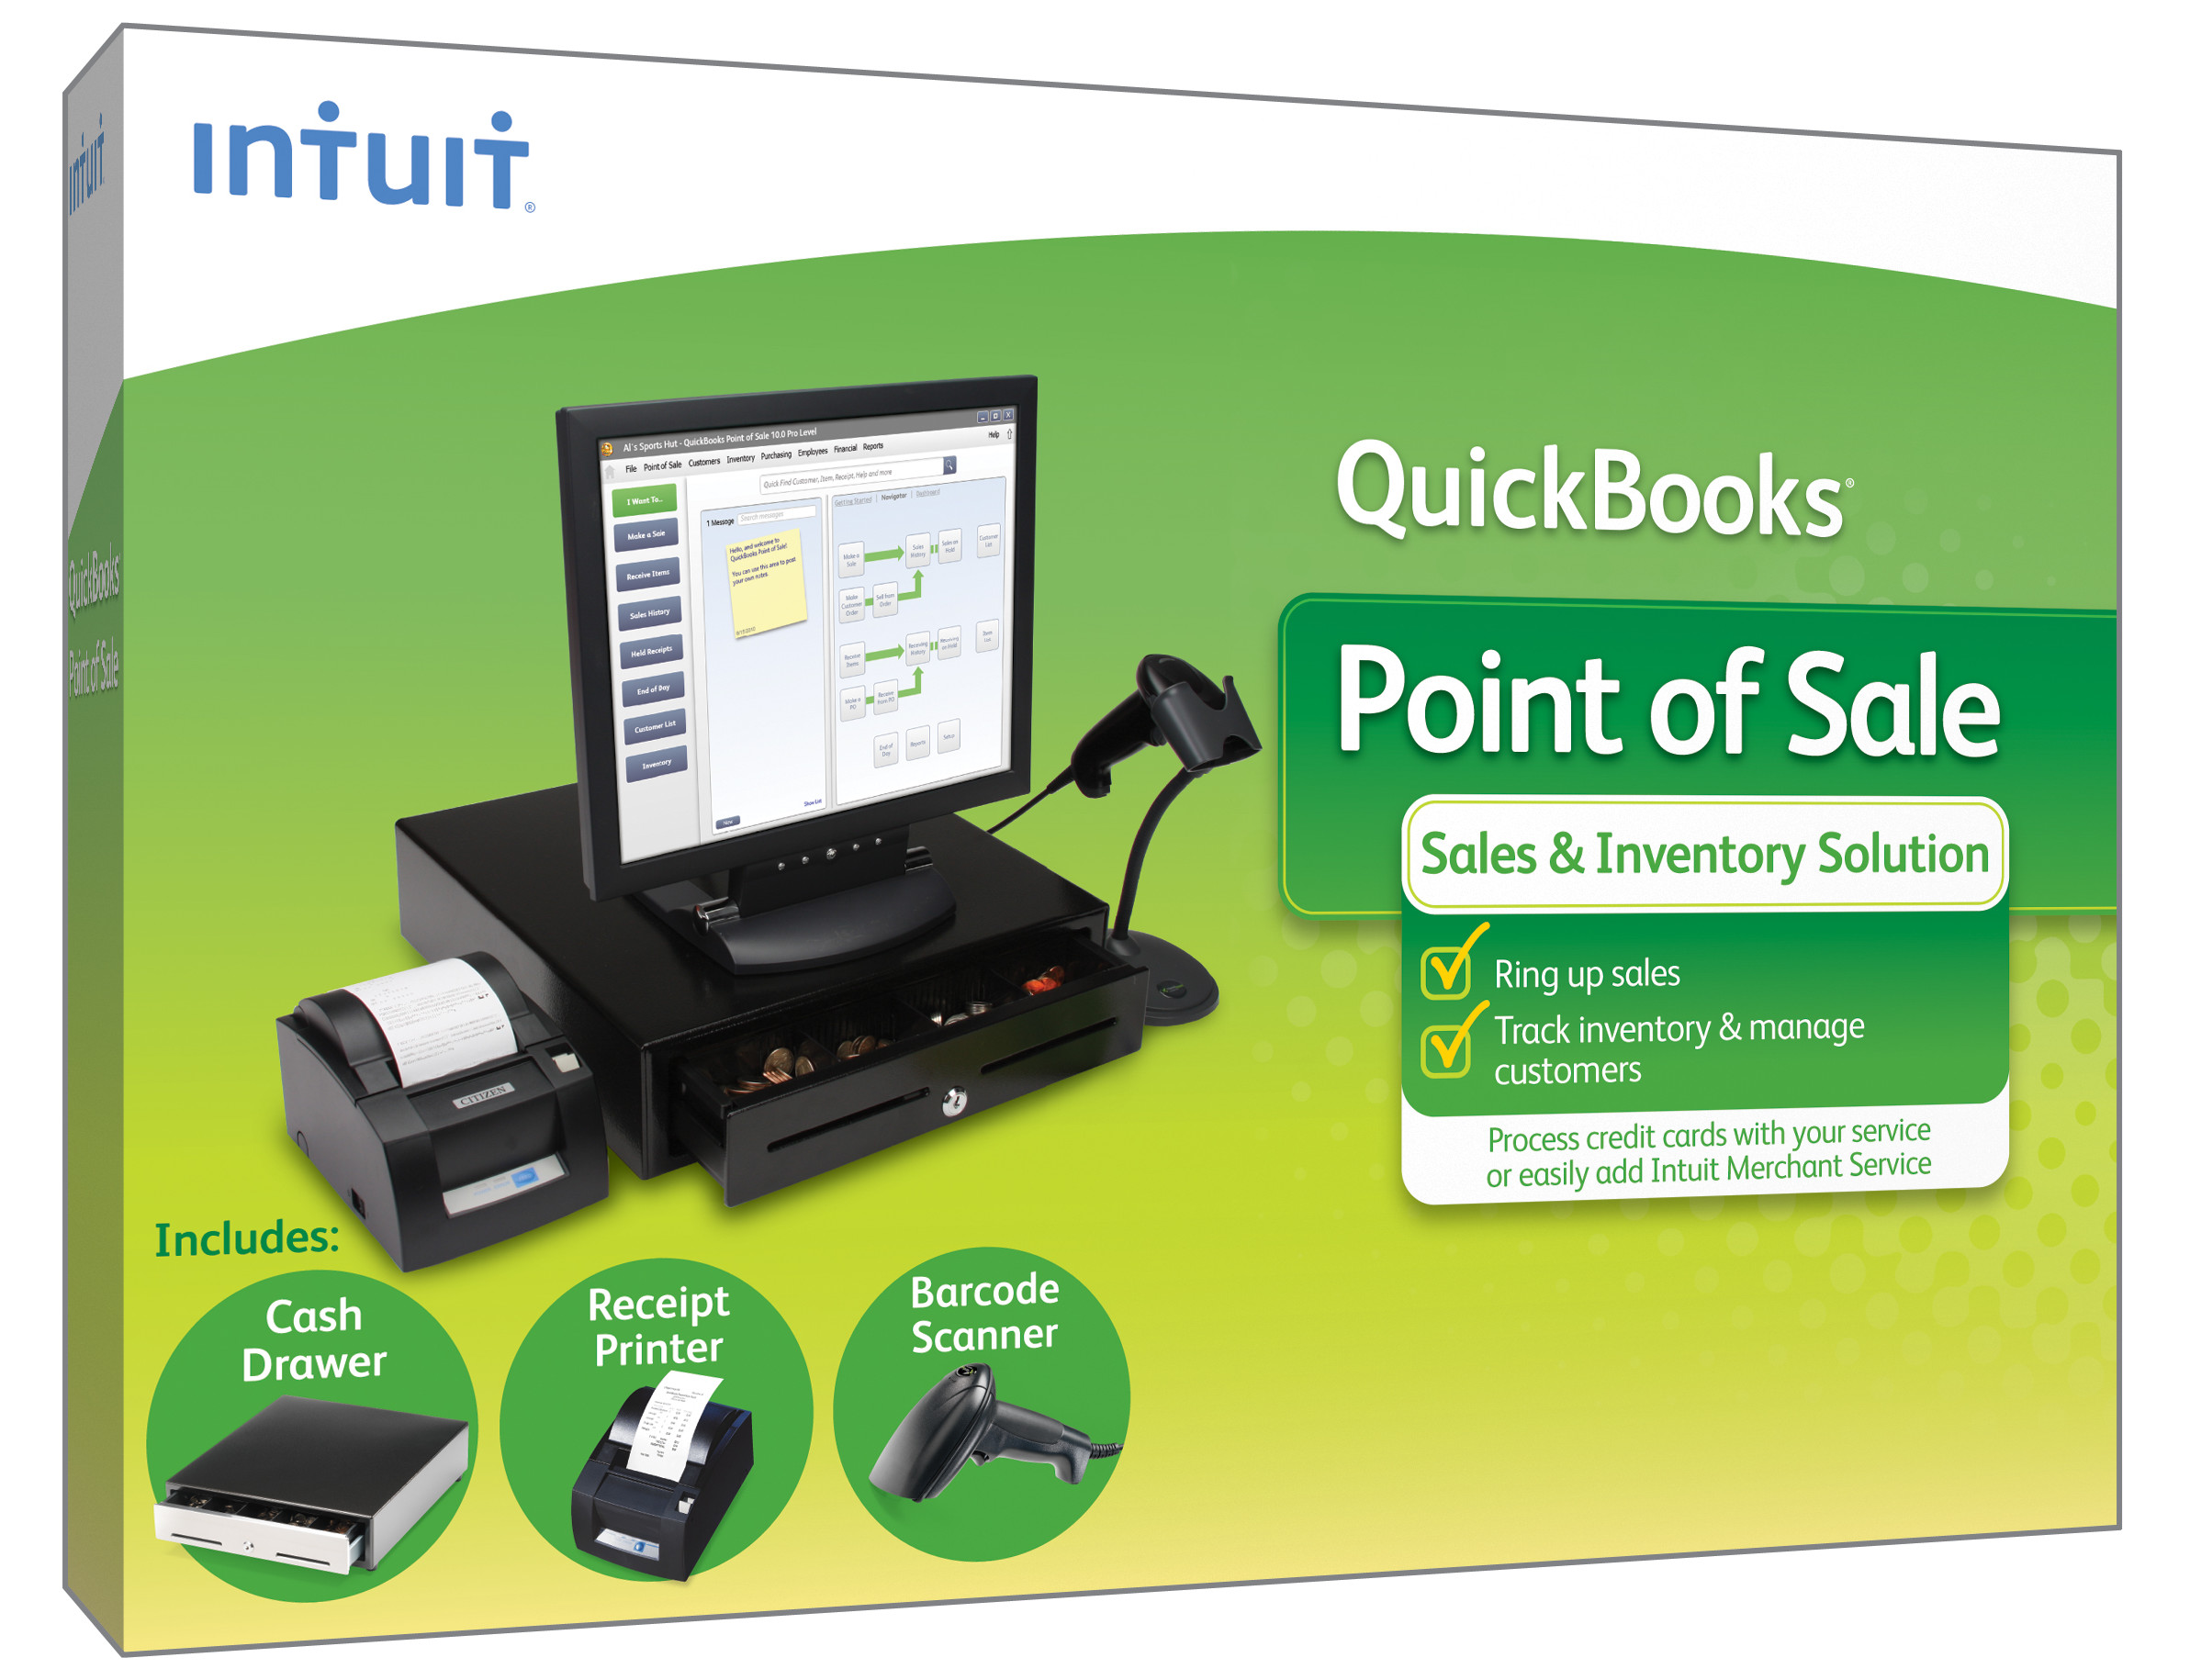 Definition Of POS (Point Of Sale)